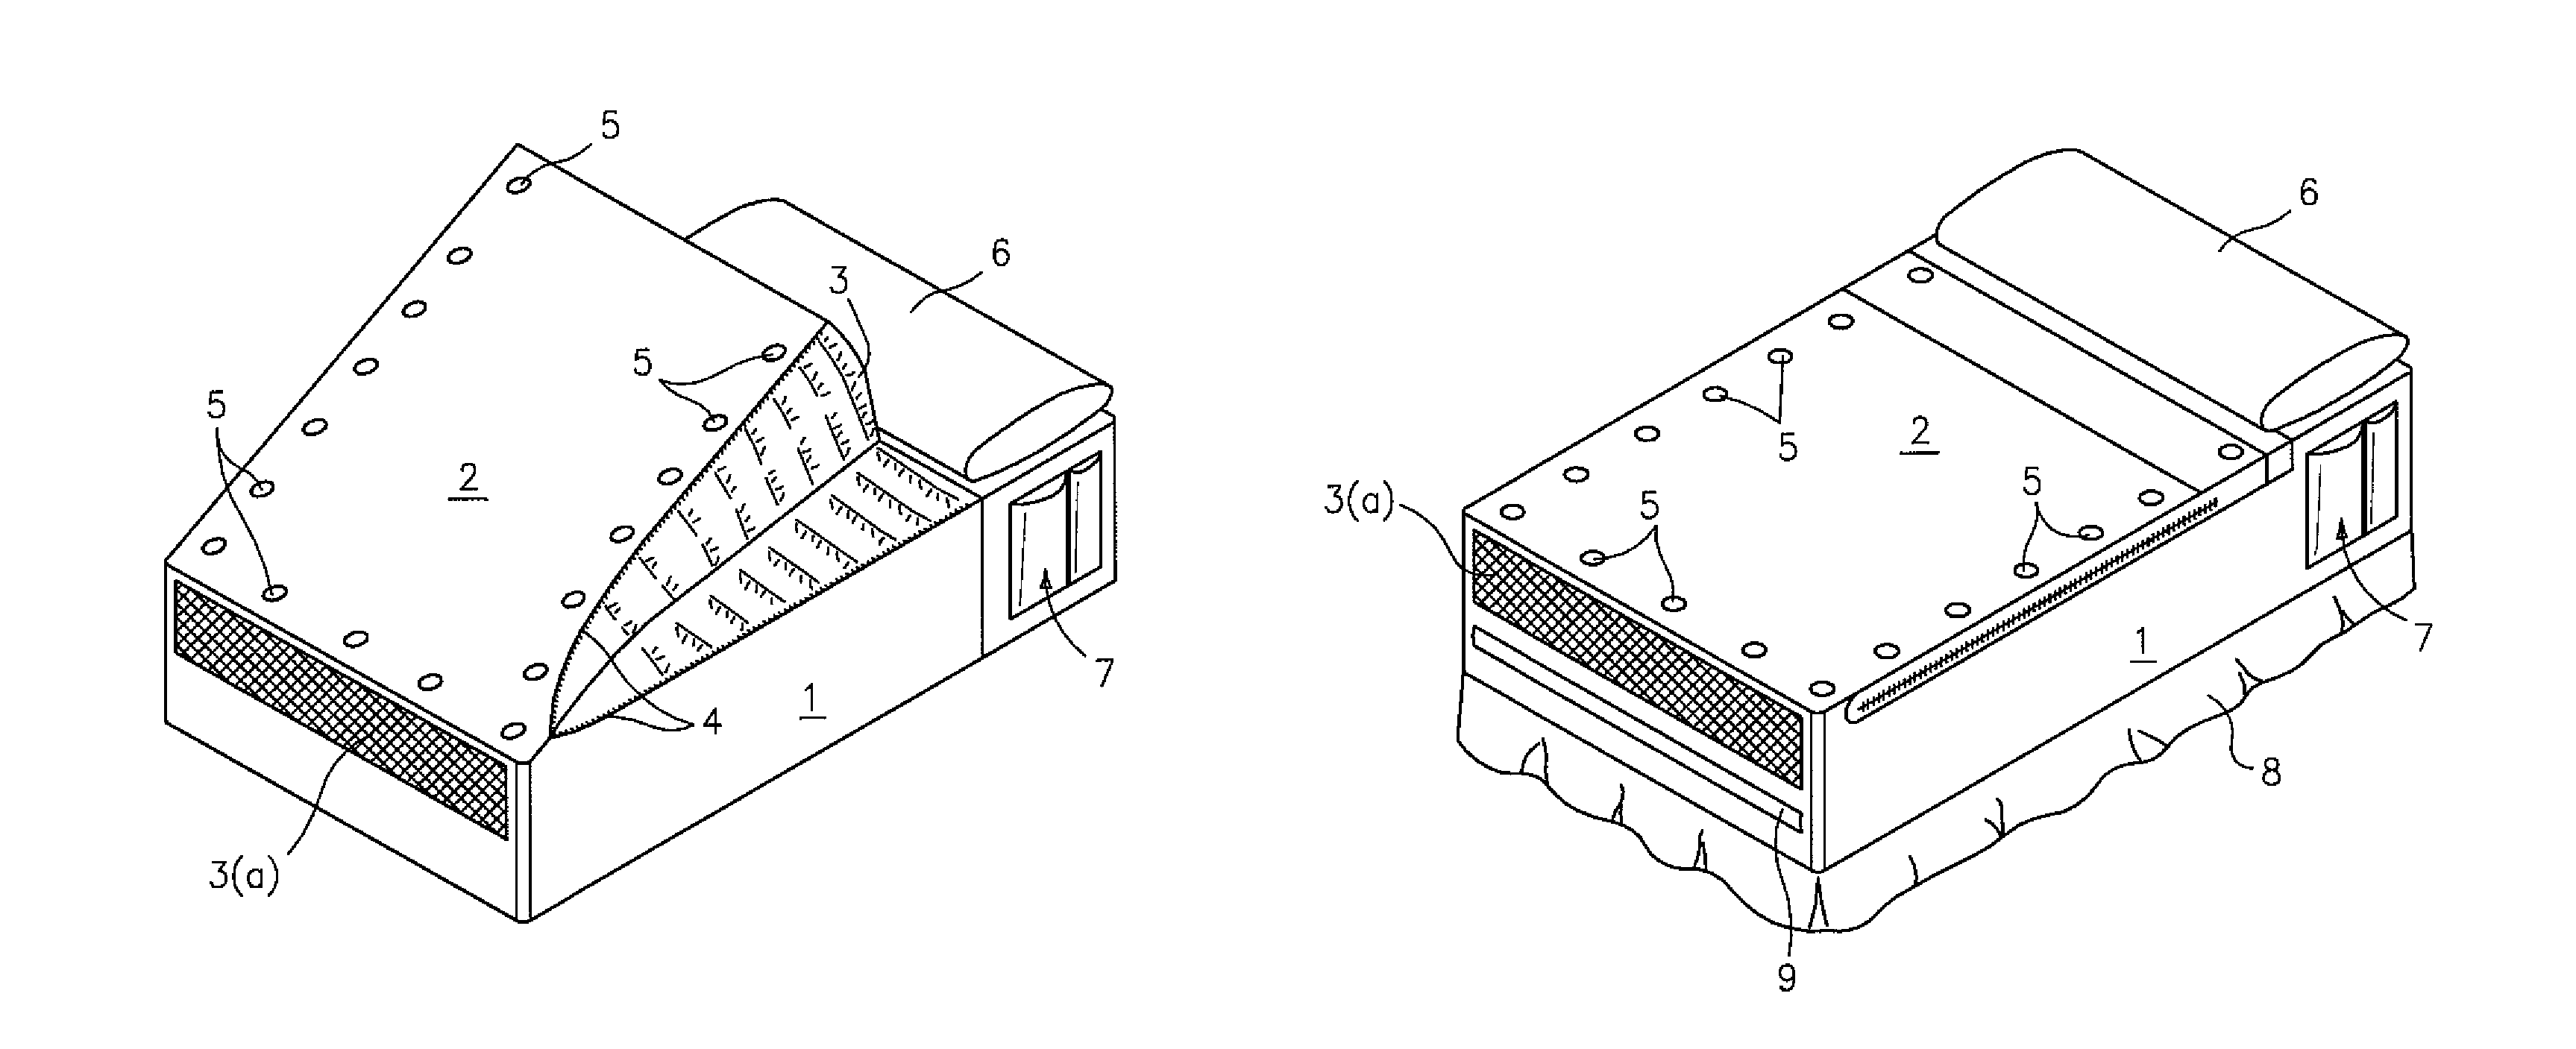 Bed covering system